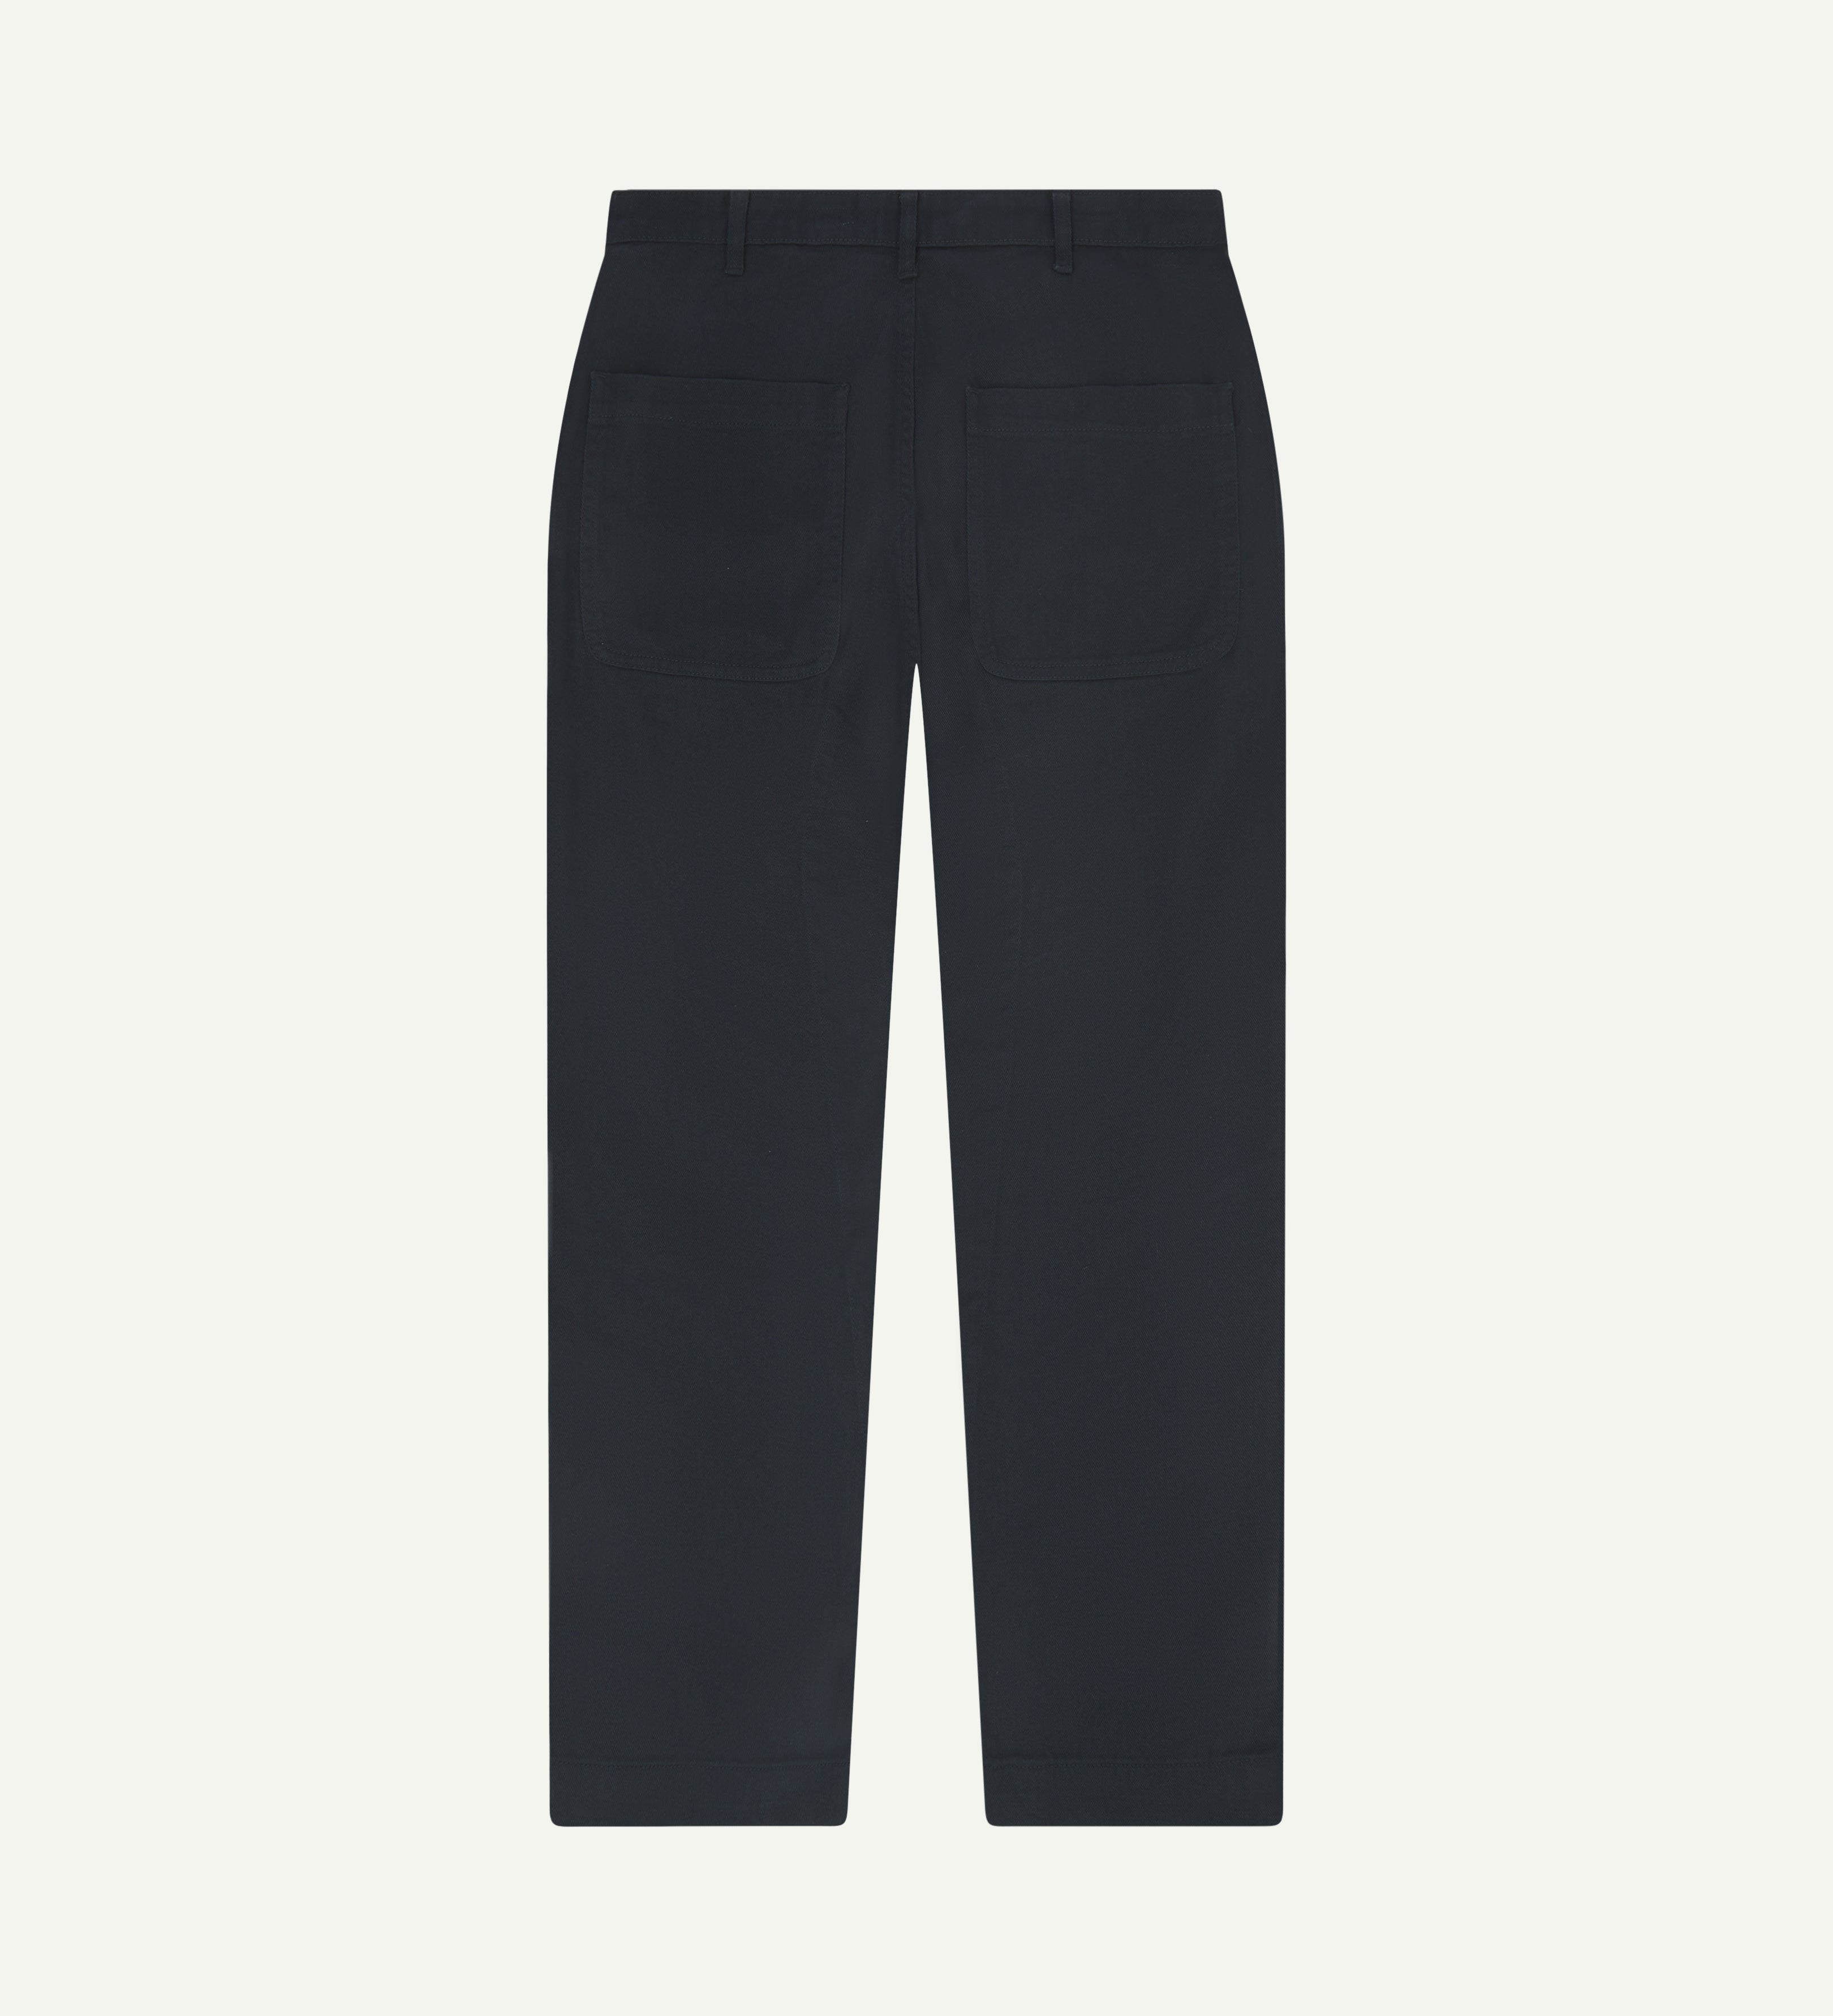 Back view of uskees cotton drill 'commuter' trousers for men in dark blue showing back pockets